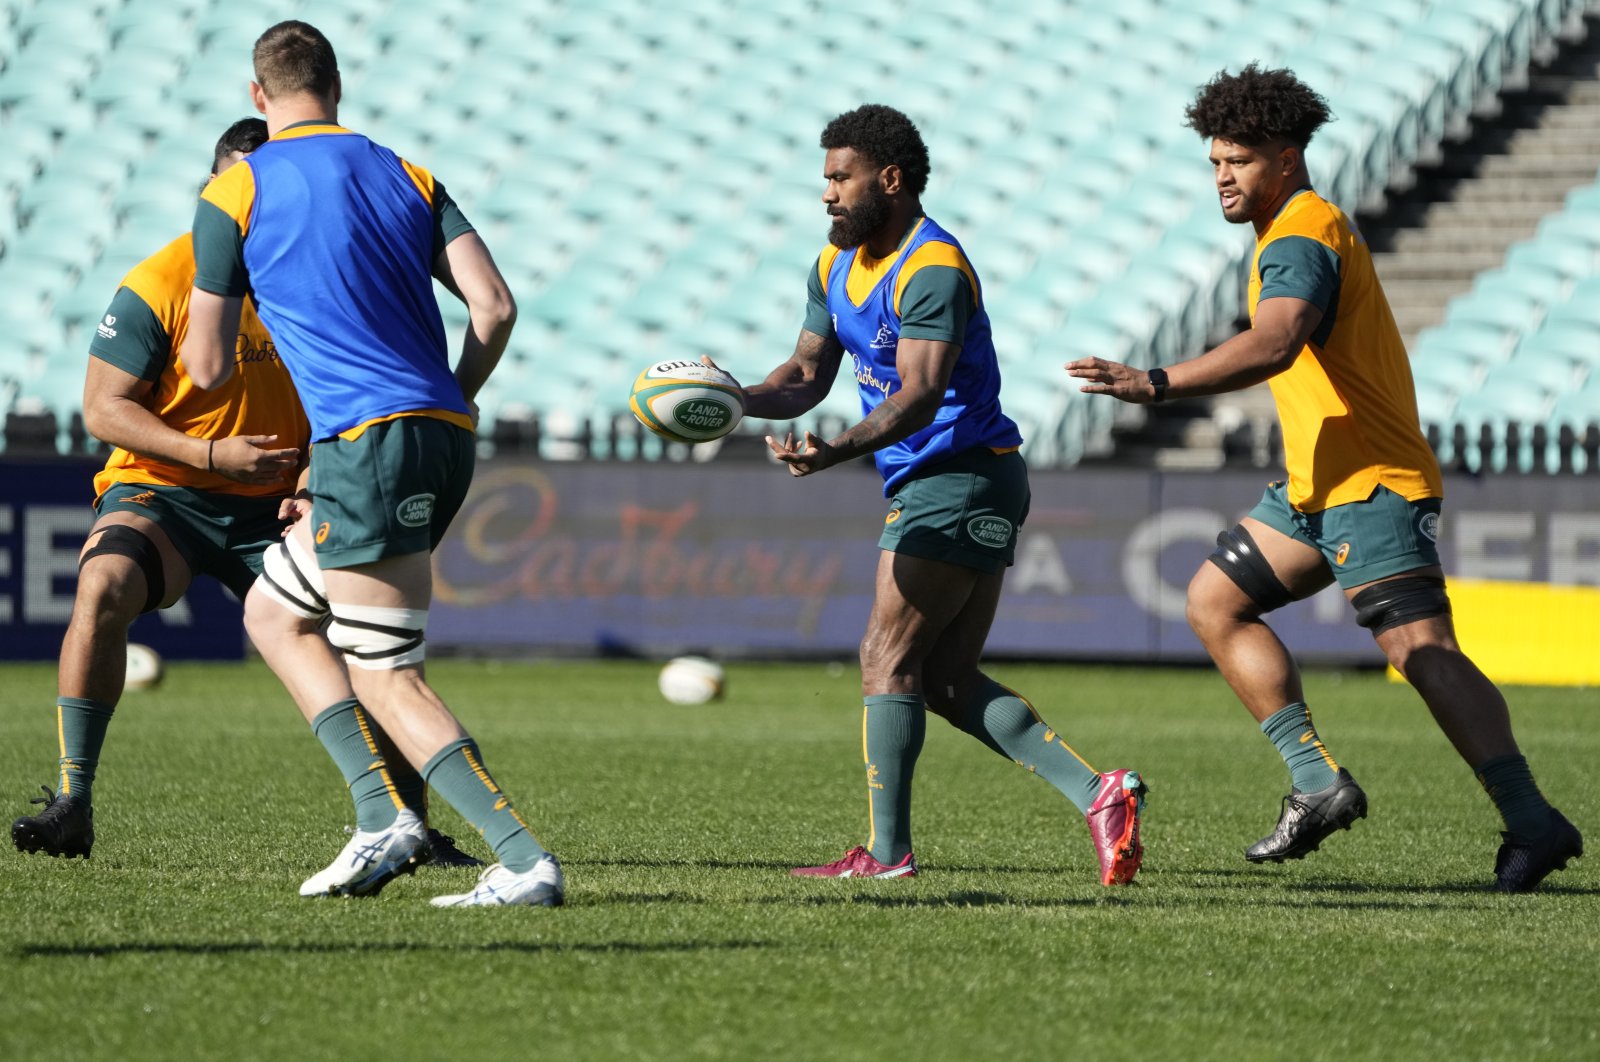 Australian rugby union player Marika Koroibete (2nd R) passes the ball during a training session, in Sydney, Australia, July 15, 2022. (AP PHOTO)